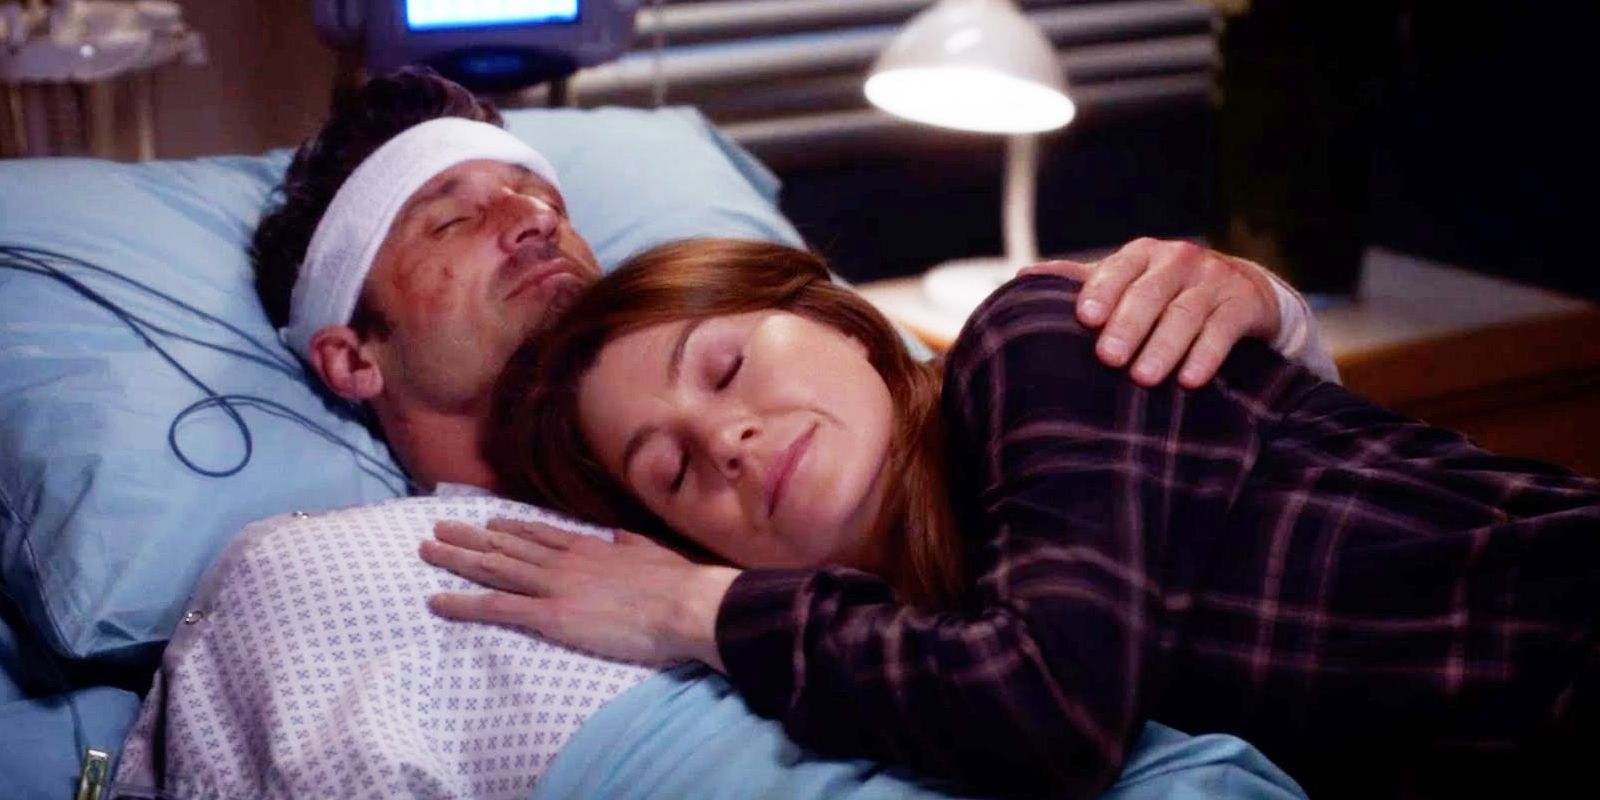 10 Greys Anatomy Episodes That Will Hook New Viewers